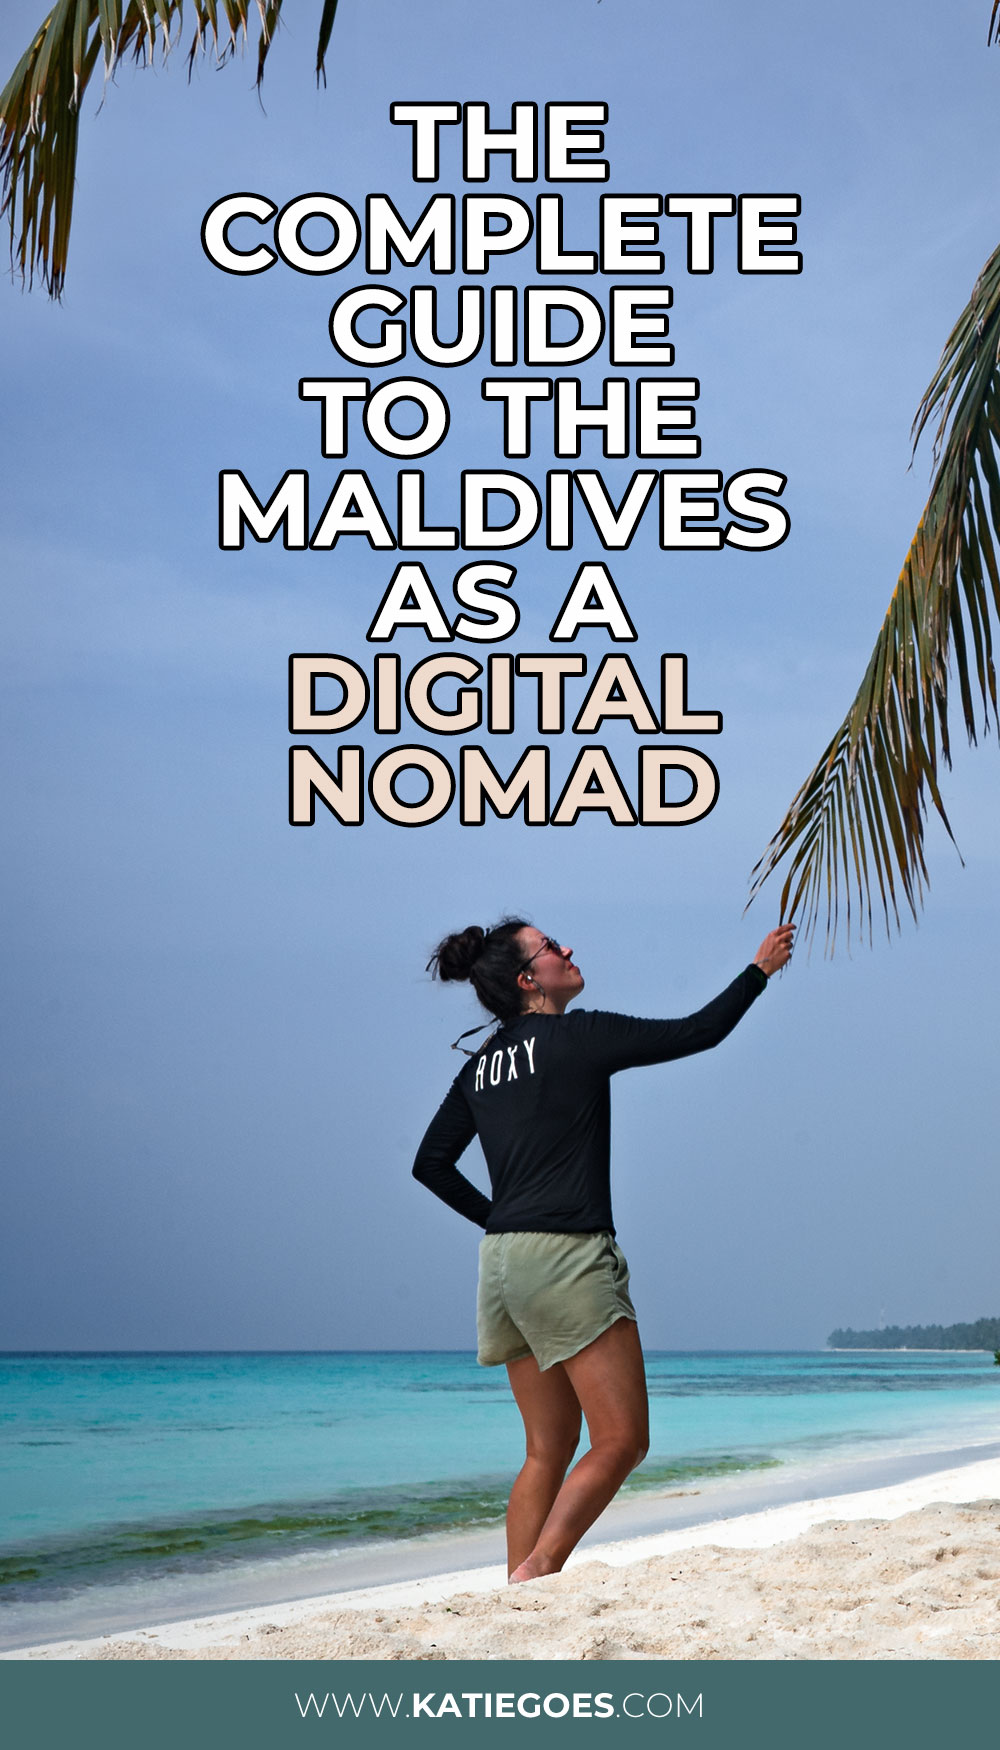 The Complete Guide to the Maldives for Digital Nomads